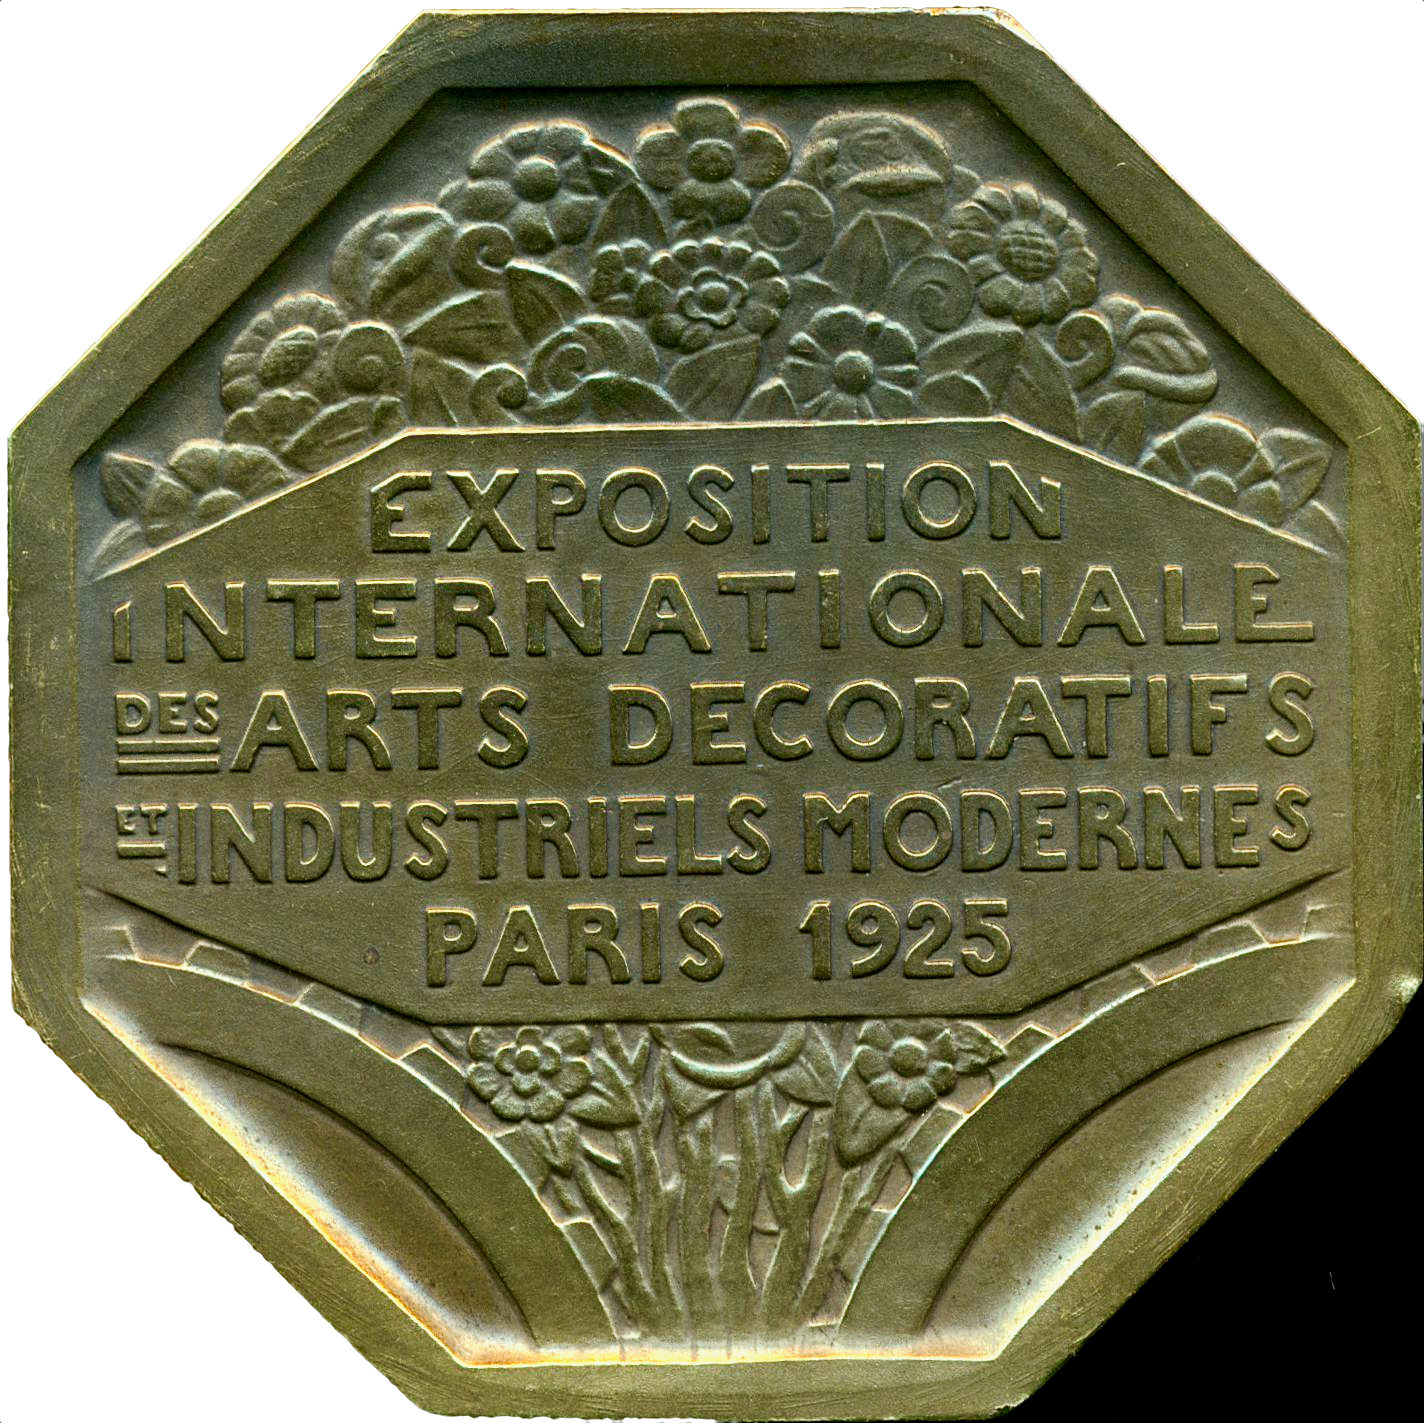 1925 FRANCE Exposition Internationale Paris 60mm bronze medal by Pierre Turin